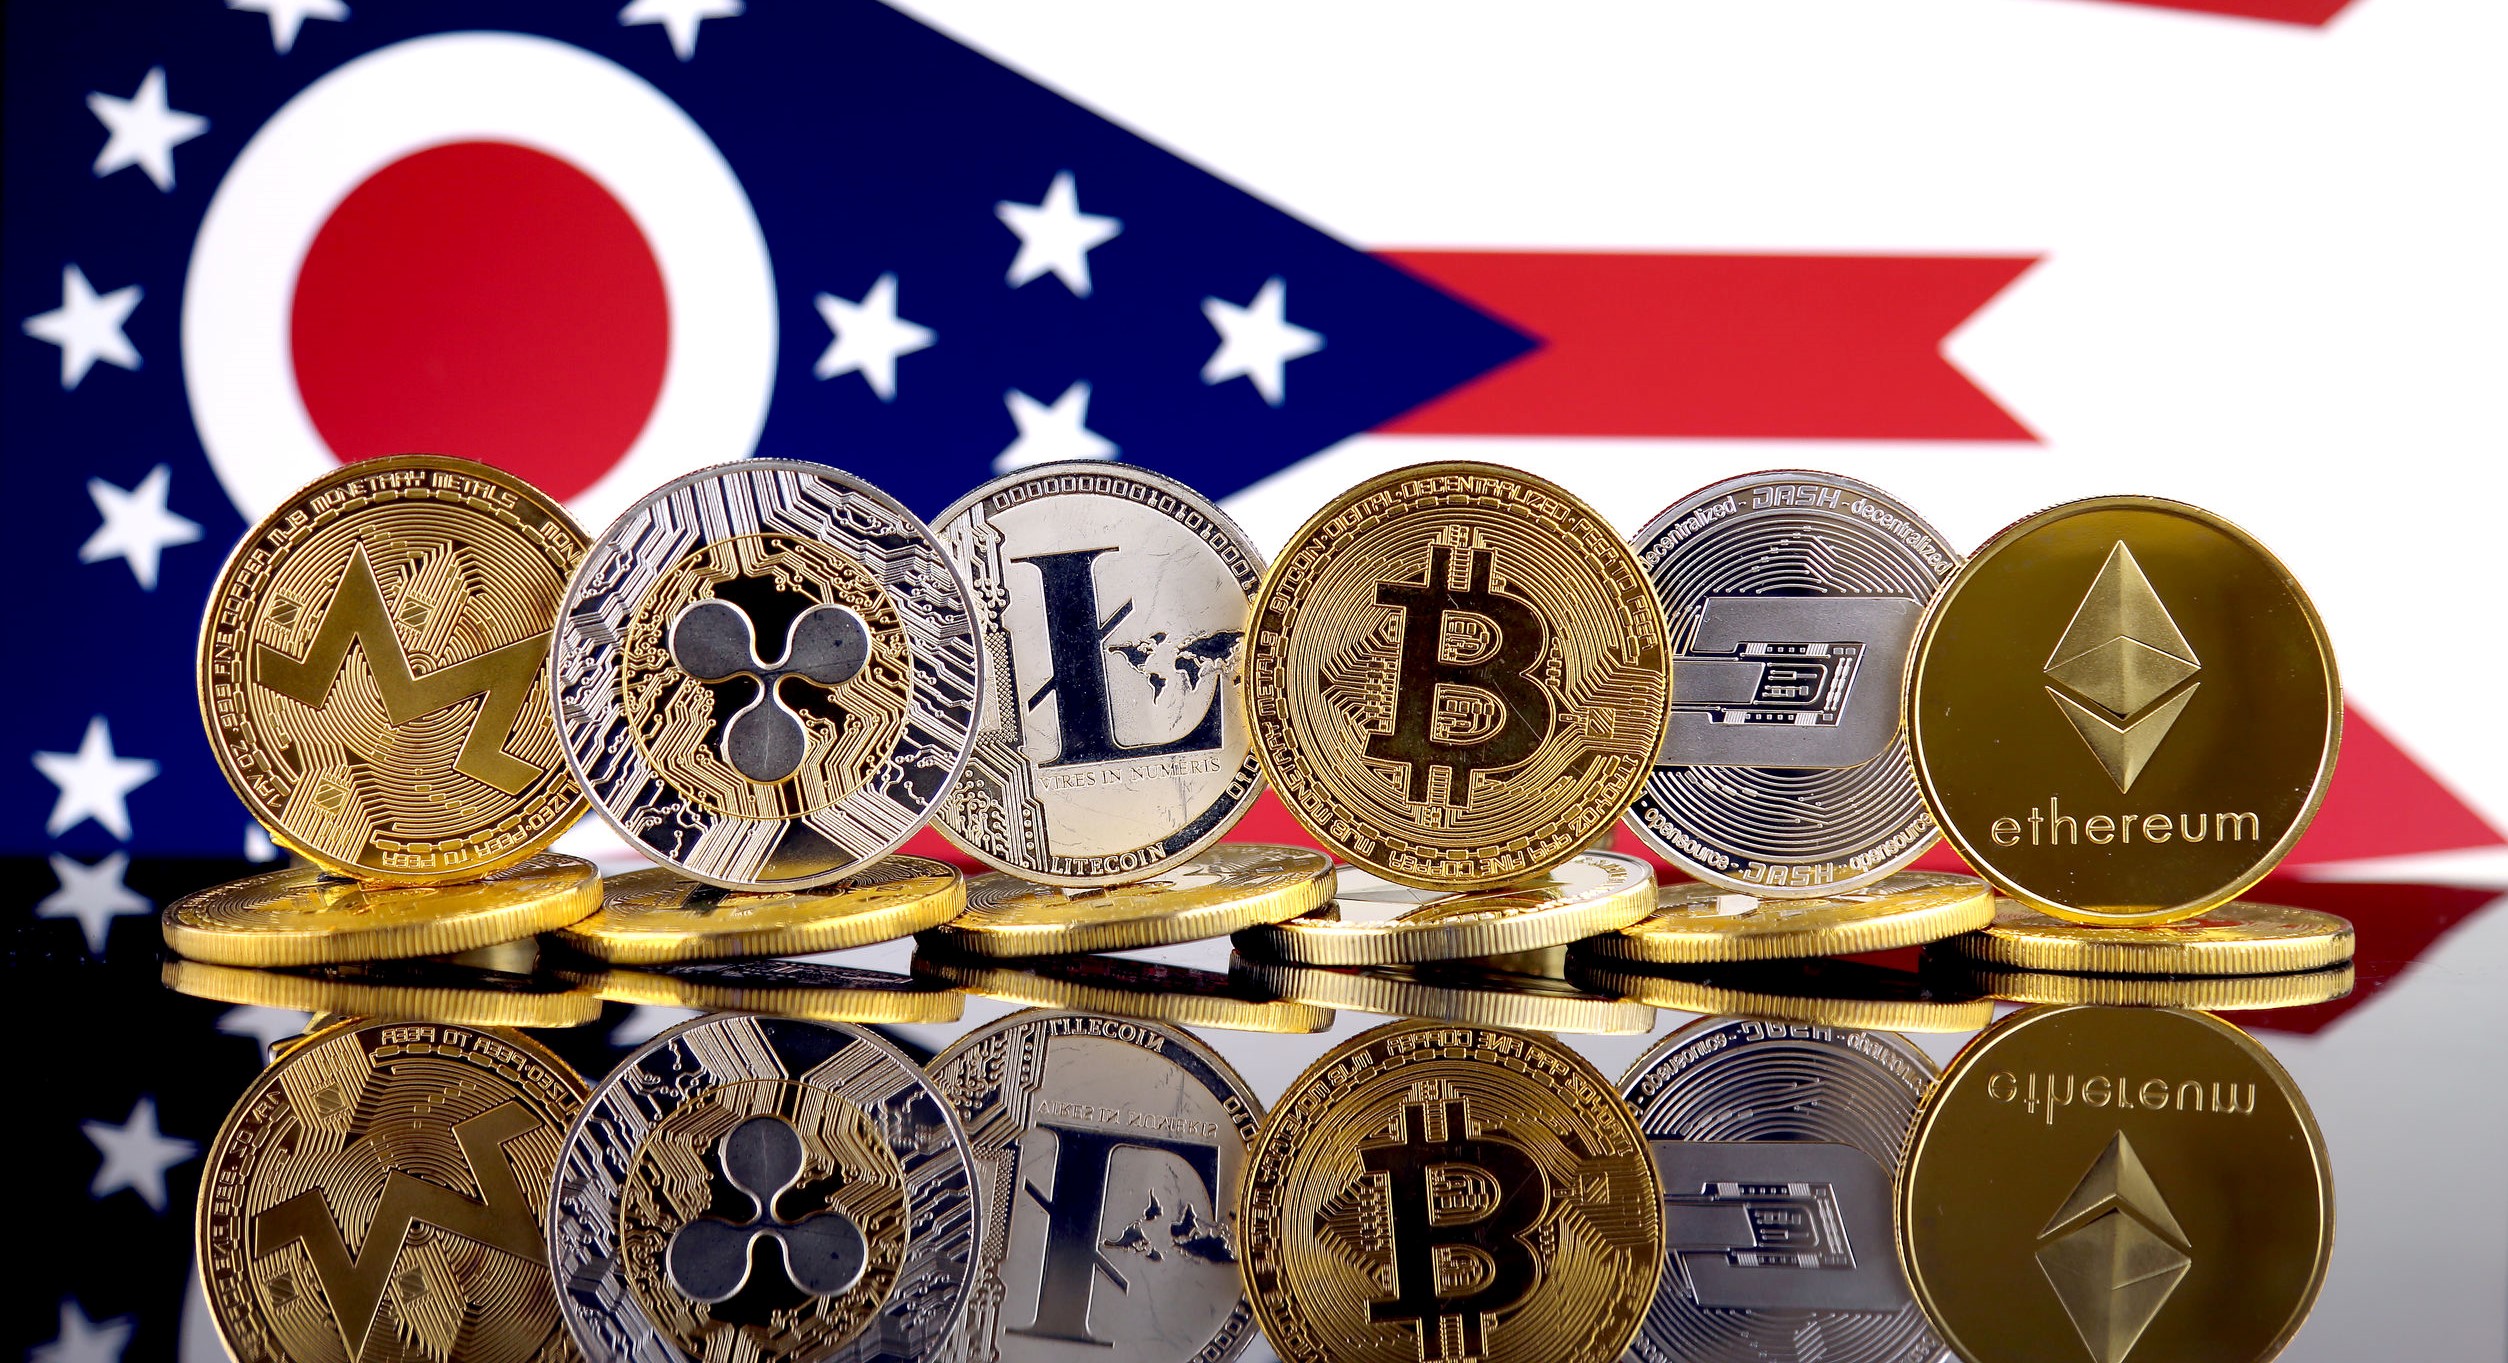 can ohio residents pay bils with crypto currency